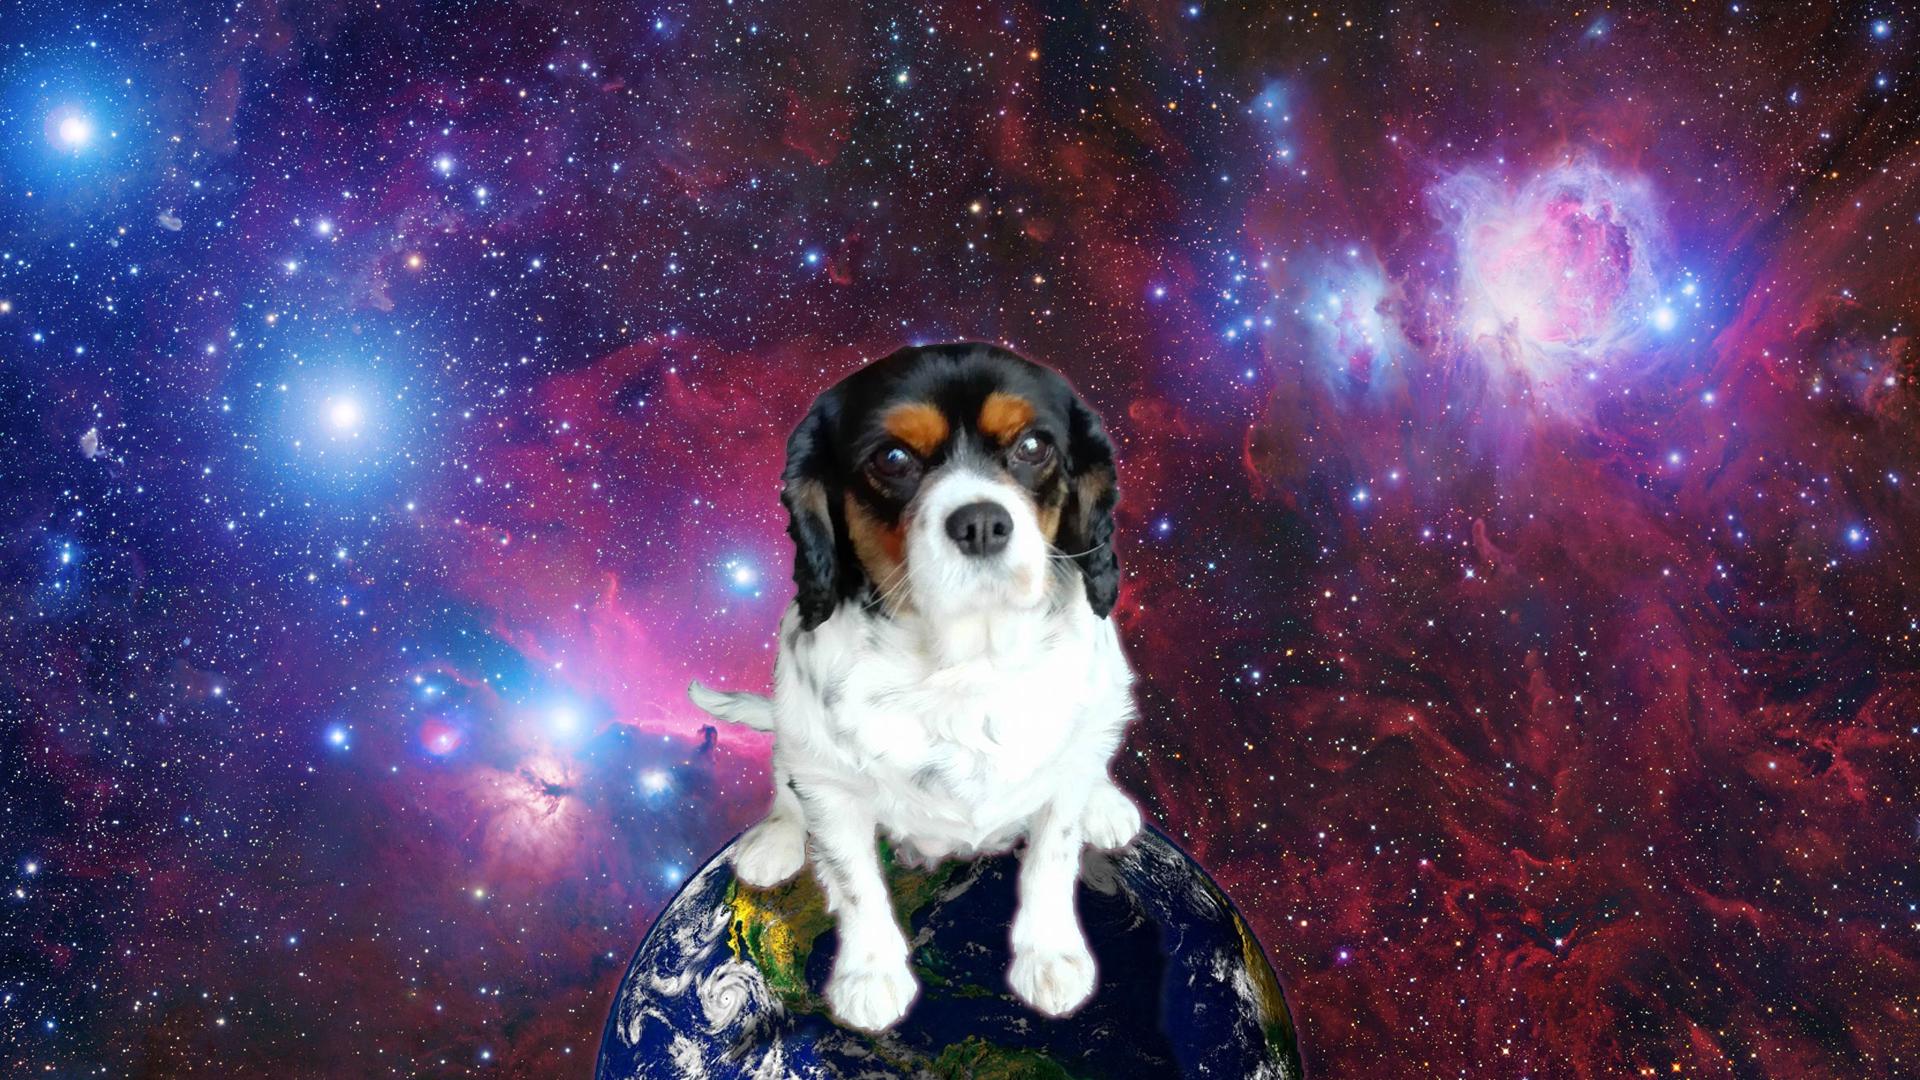 Dogs in Space Wallpaper. Awesome Space Wallpaper, Amazing Space Wallpaper and Space Wallpaper